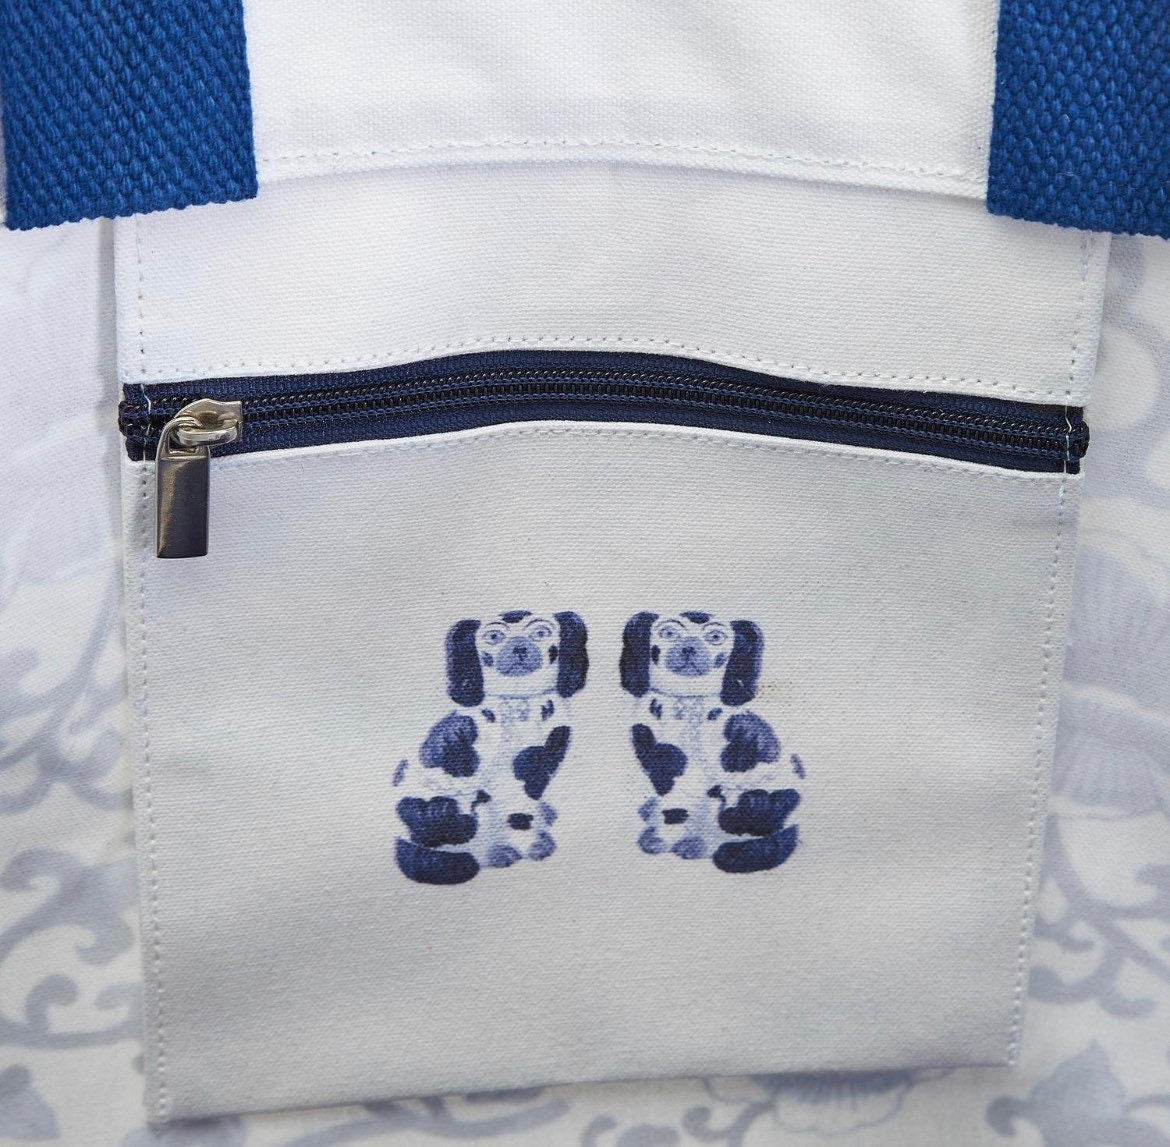 Blue and white chinoiserie tote, two styles to choose from, monogram available